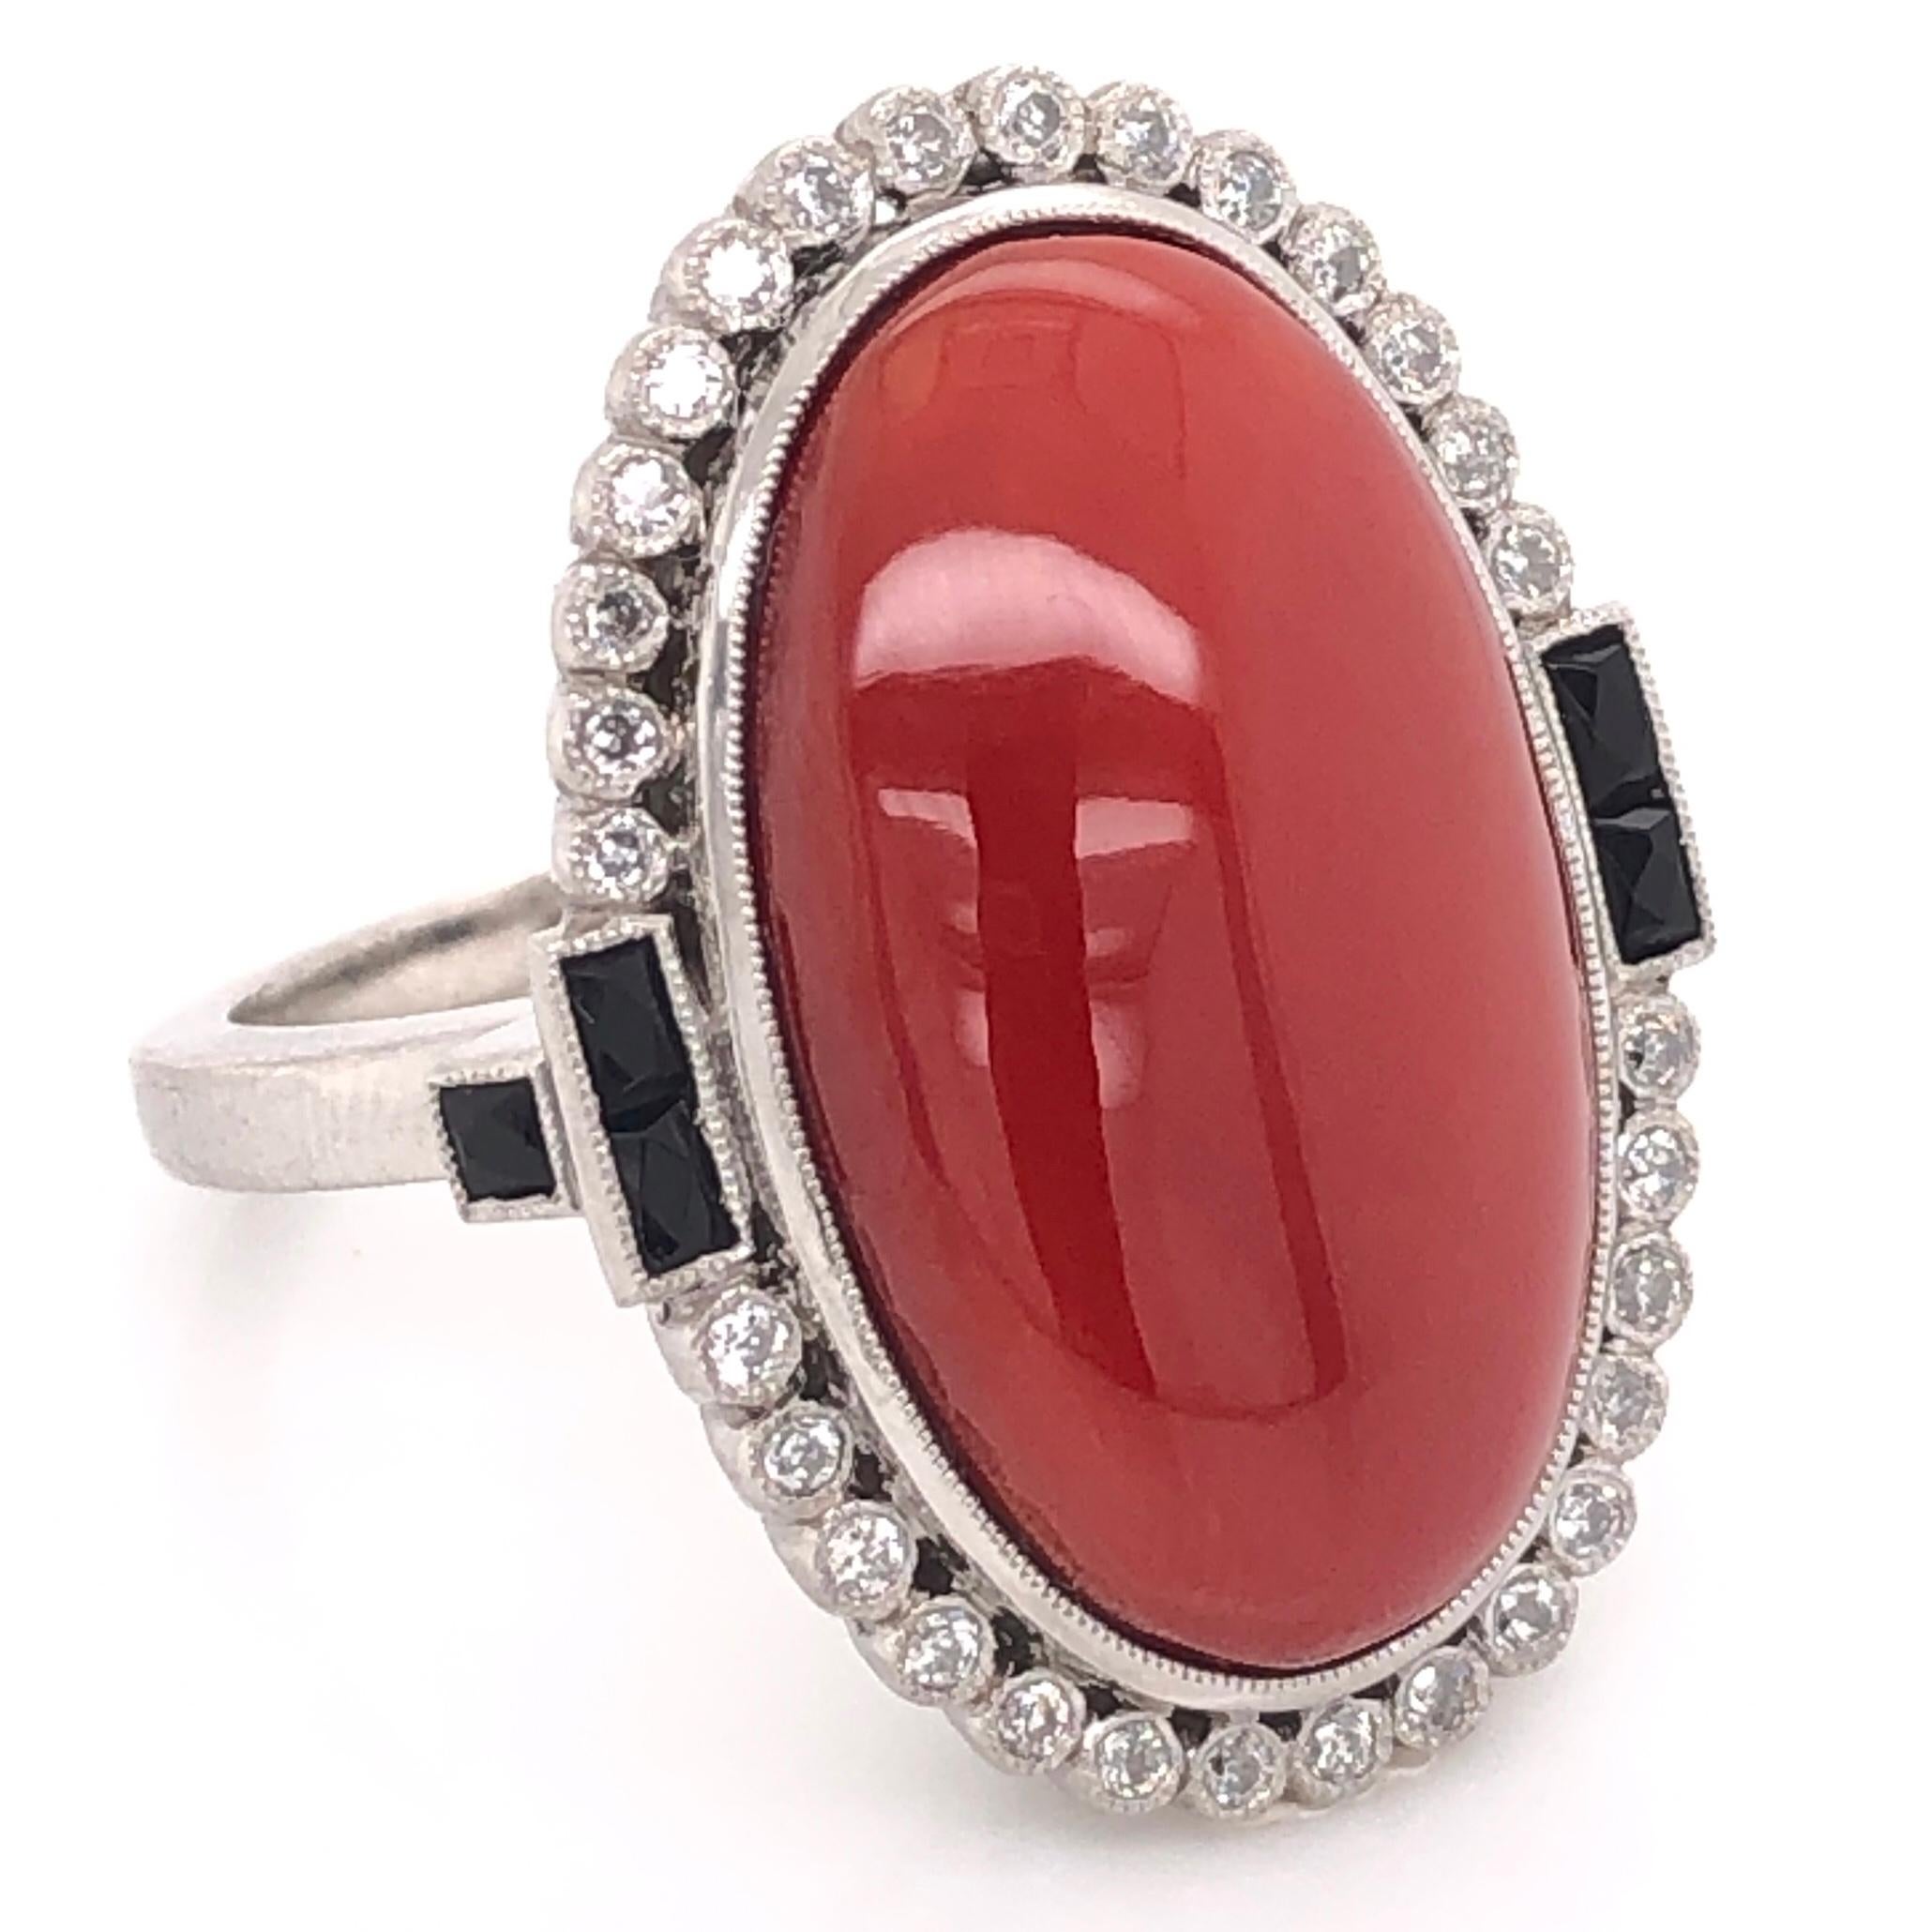 Simply Beautiful Finely Detailed Platinum Cocktail Ring center securely set with a 15.81 Carat Oval Deep Red Cabochon Coral and surrounded by Diamonds, approx. 0.35 total carat weight and accented by Black onyx on either side. Hand crafted in